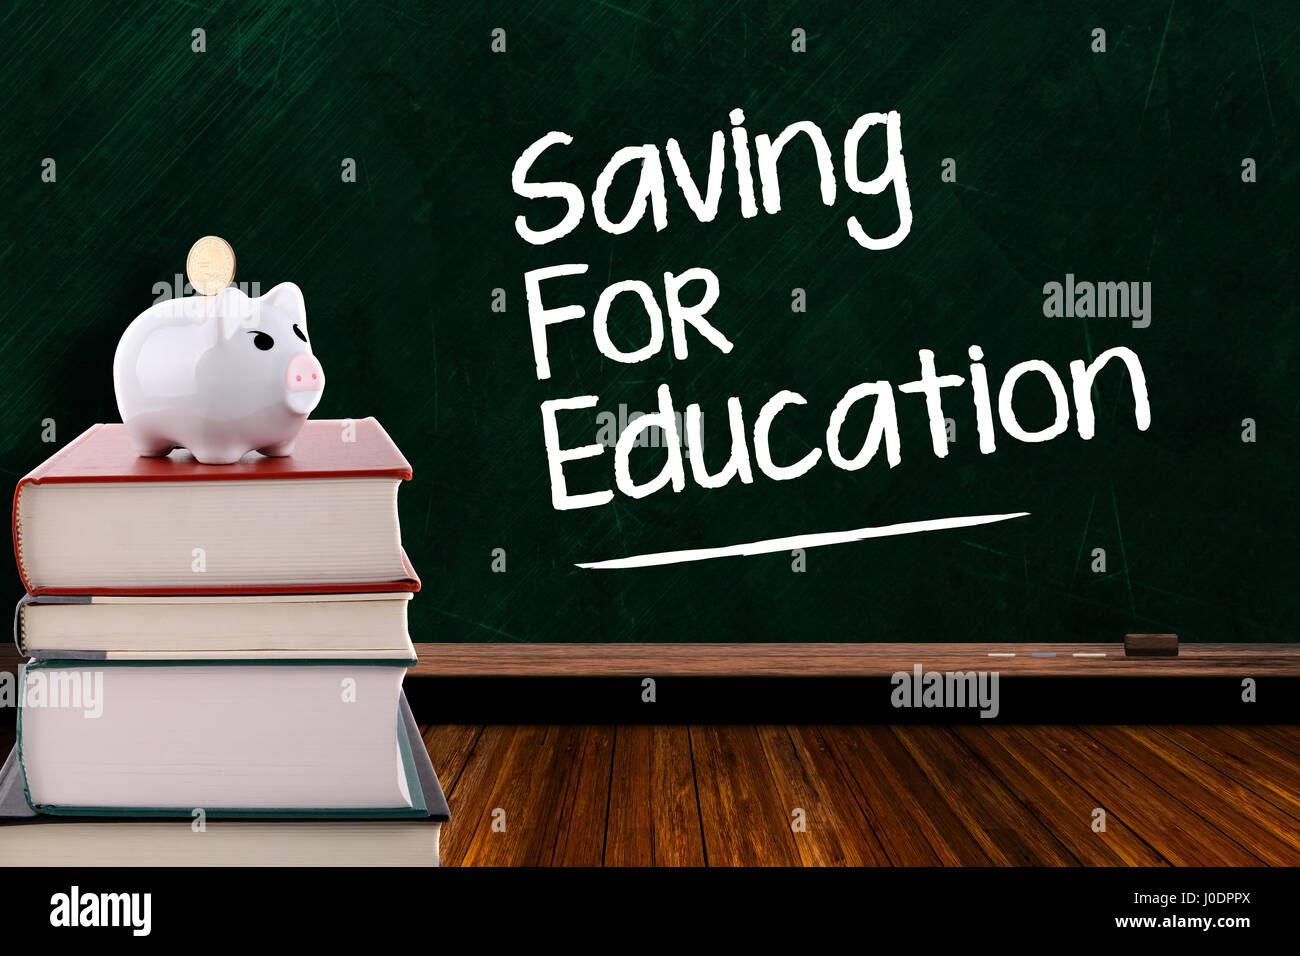 Piggy bank with coin on a stack of books on chalkboard background and copy space. Concept of saving for education and rising cost of education. Stock Photo